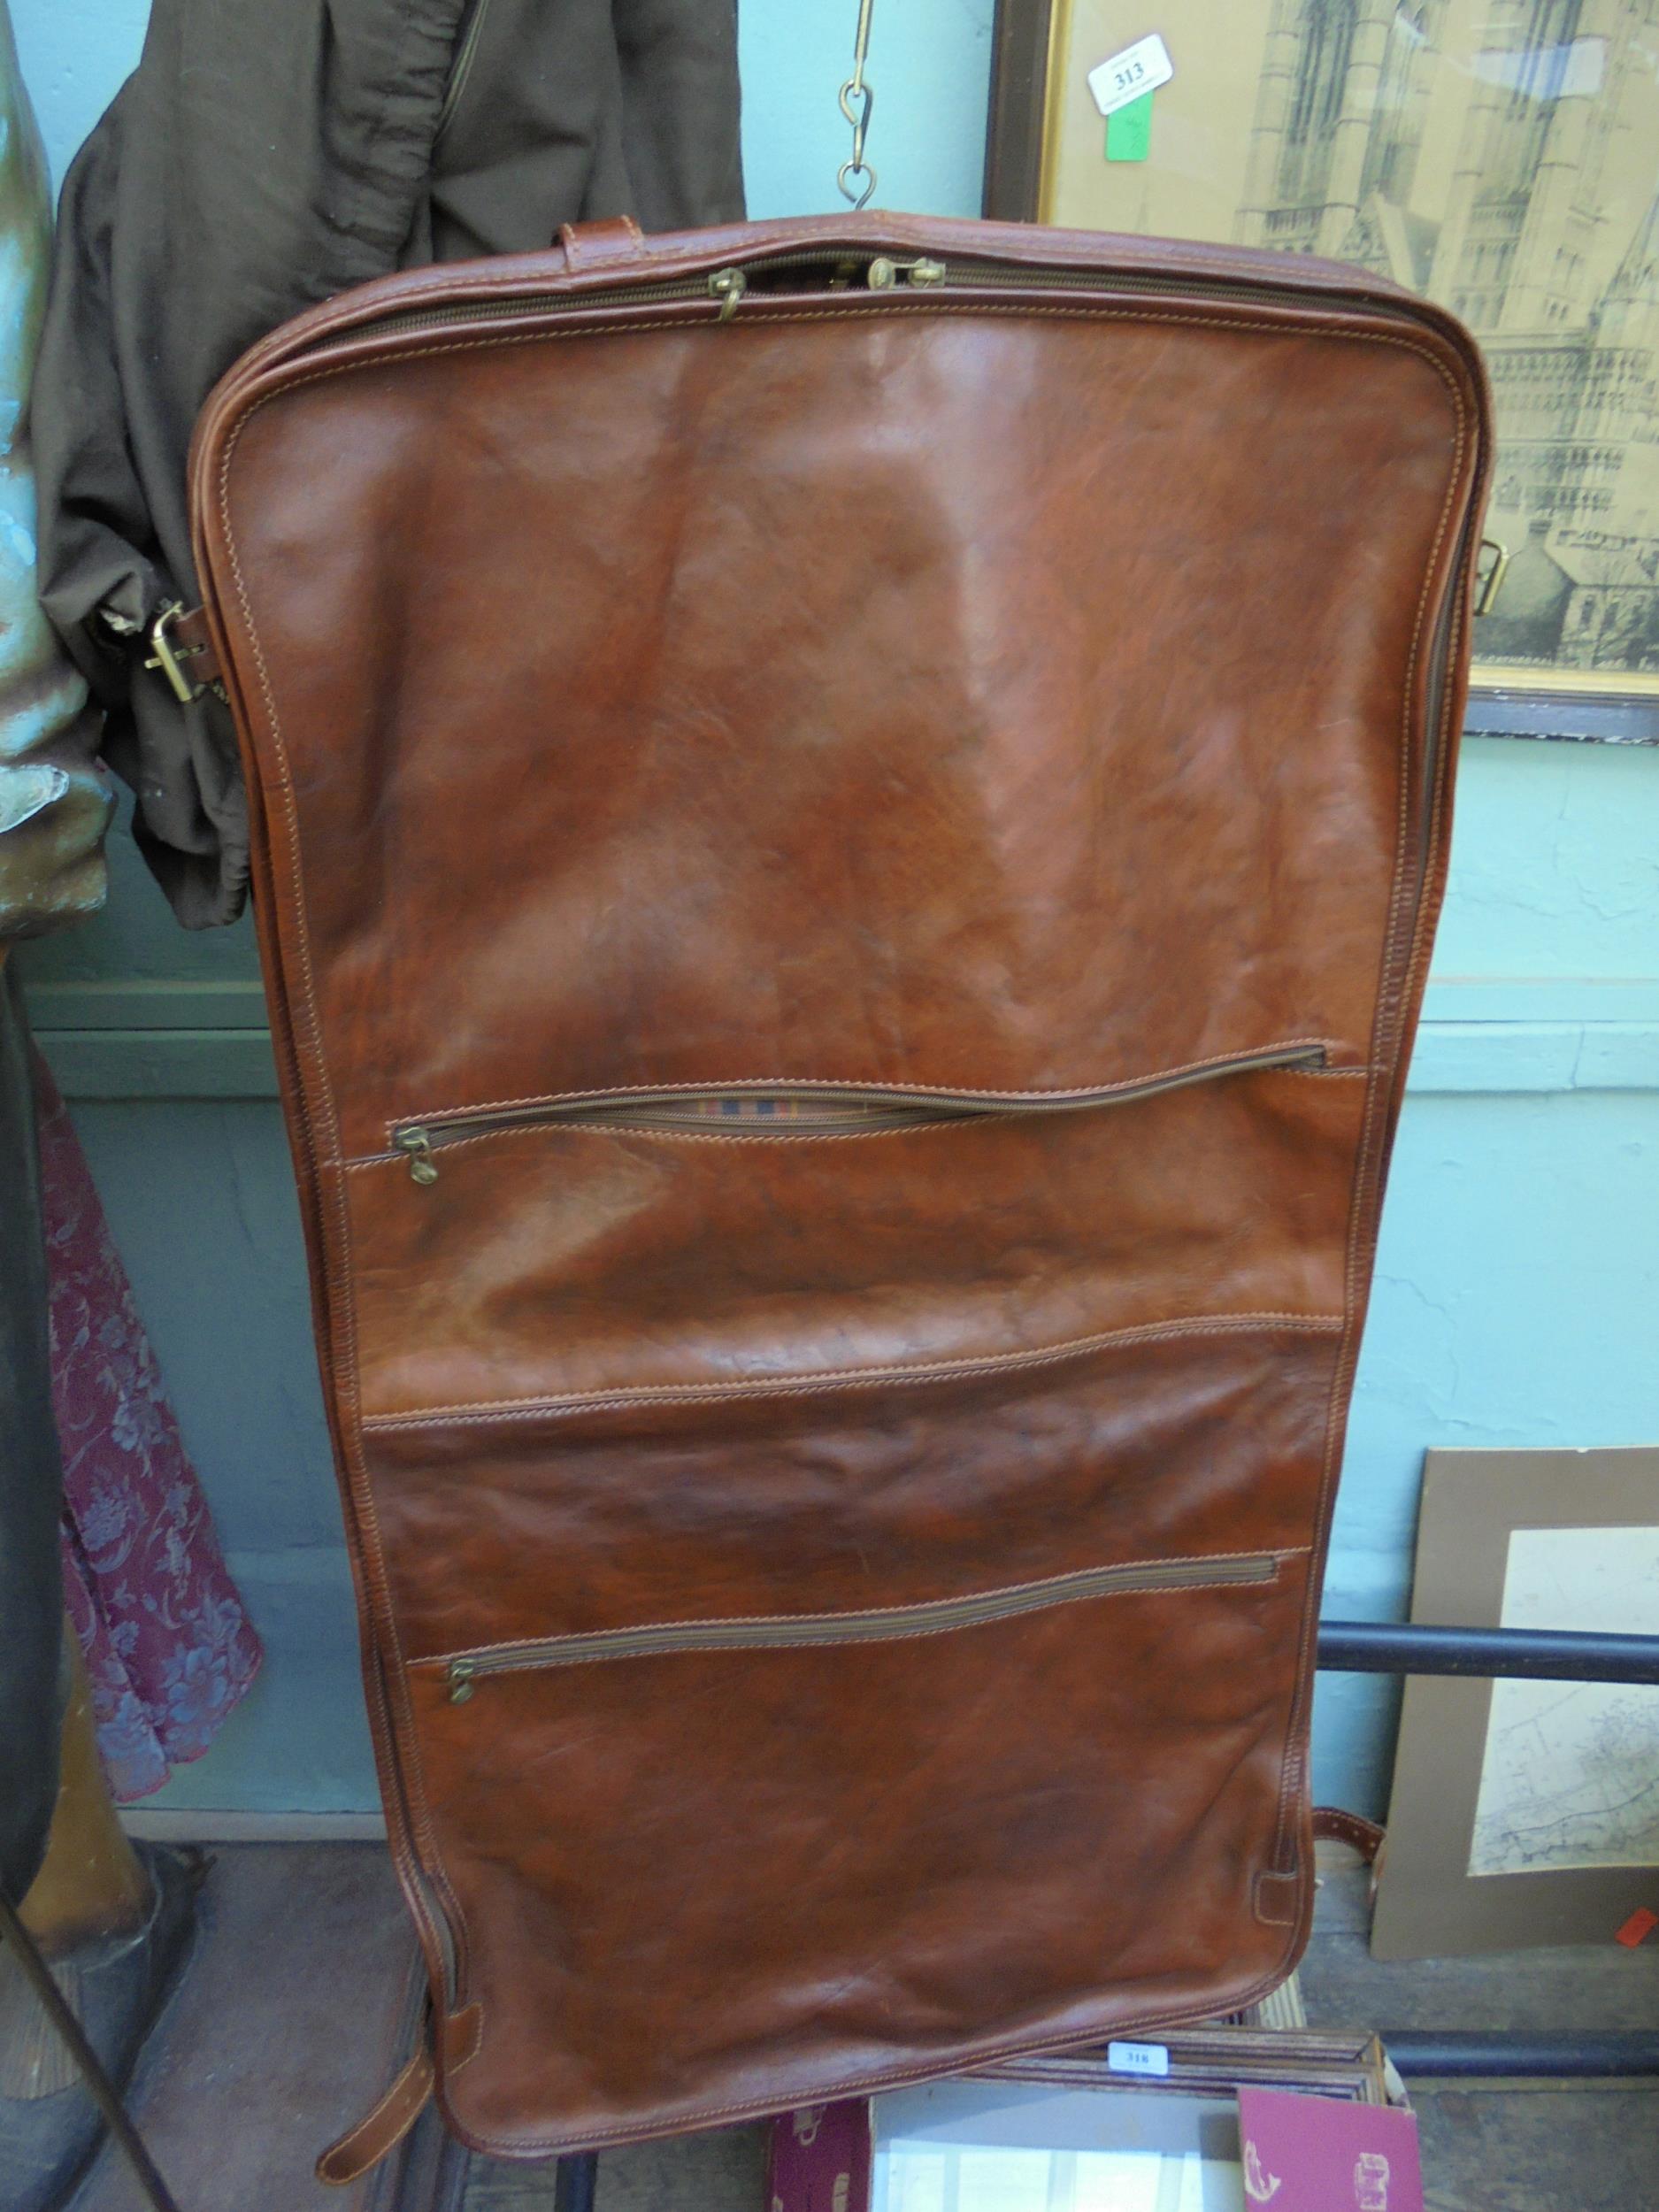 Fantastic leather gentleman's suitcase entitled "The Bridge" in original and good condition cover